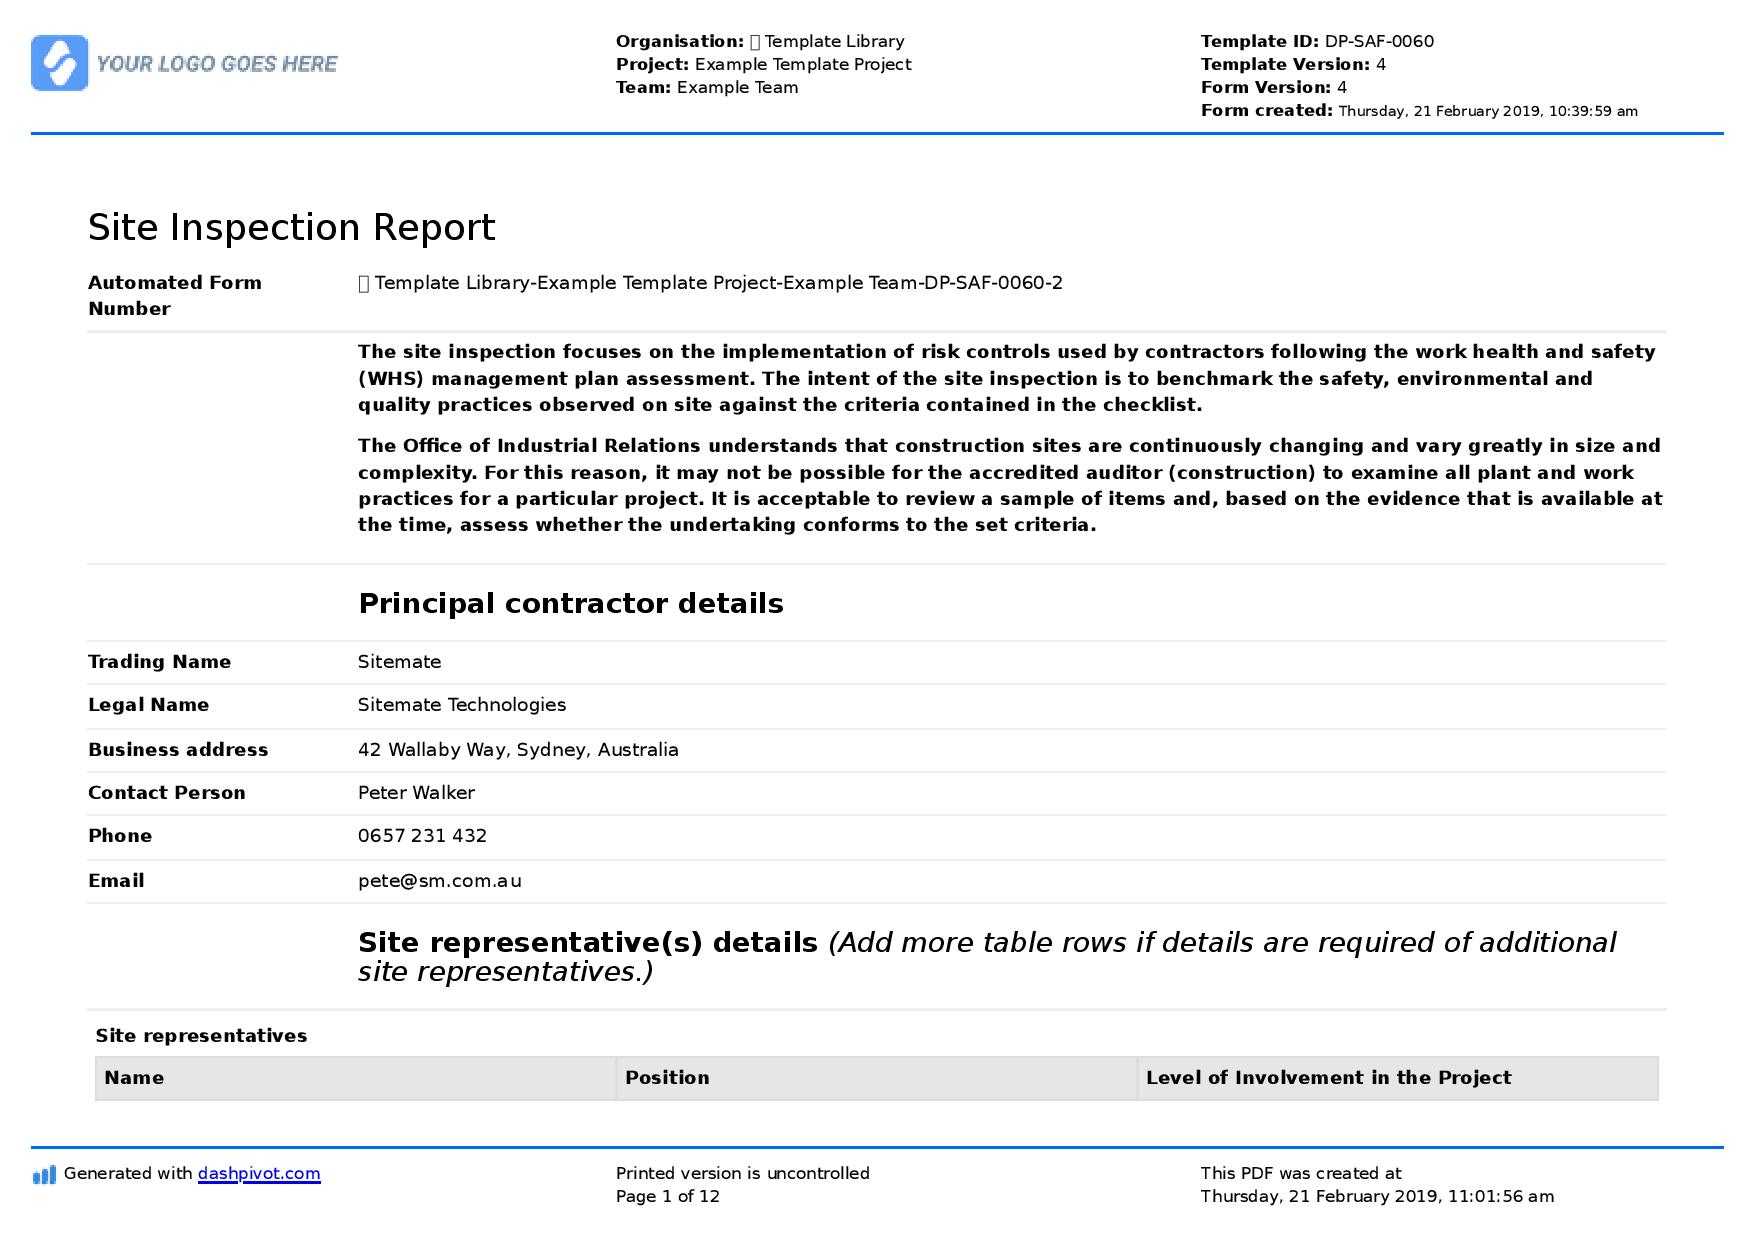 Site Inspection Report: Free Template, Sample And A Proven Intended For Property Management Inspection Report Template